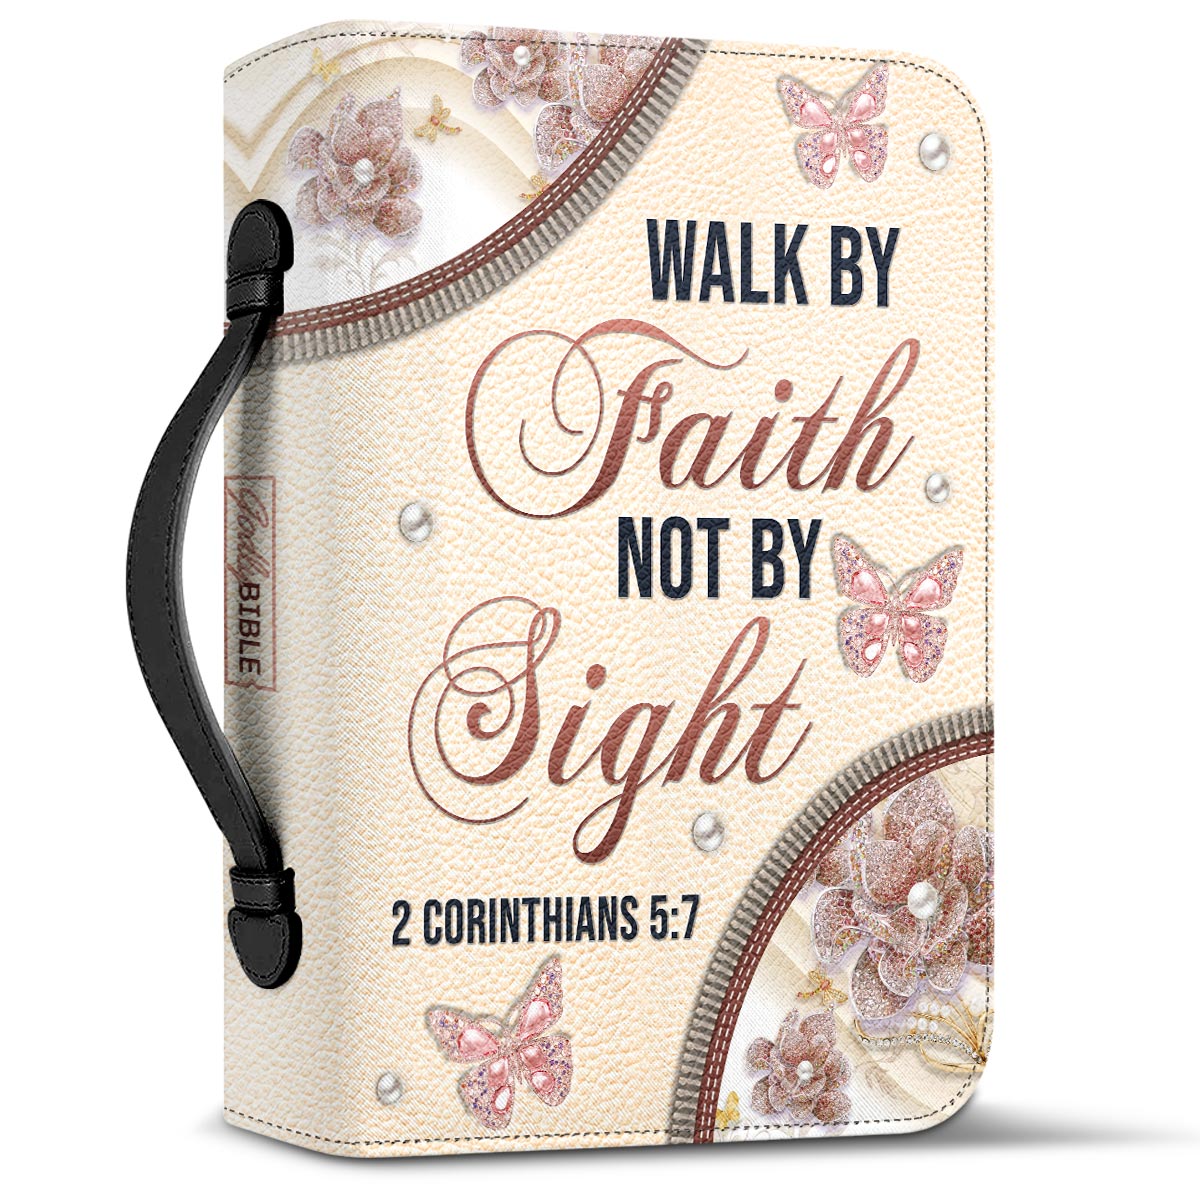 Walk By Faith Not By Sight 2 Corinthians 5 7 Butterfly Jewelry Personalized Bible Cover - Inspirational Bible Covers For Women